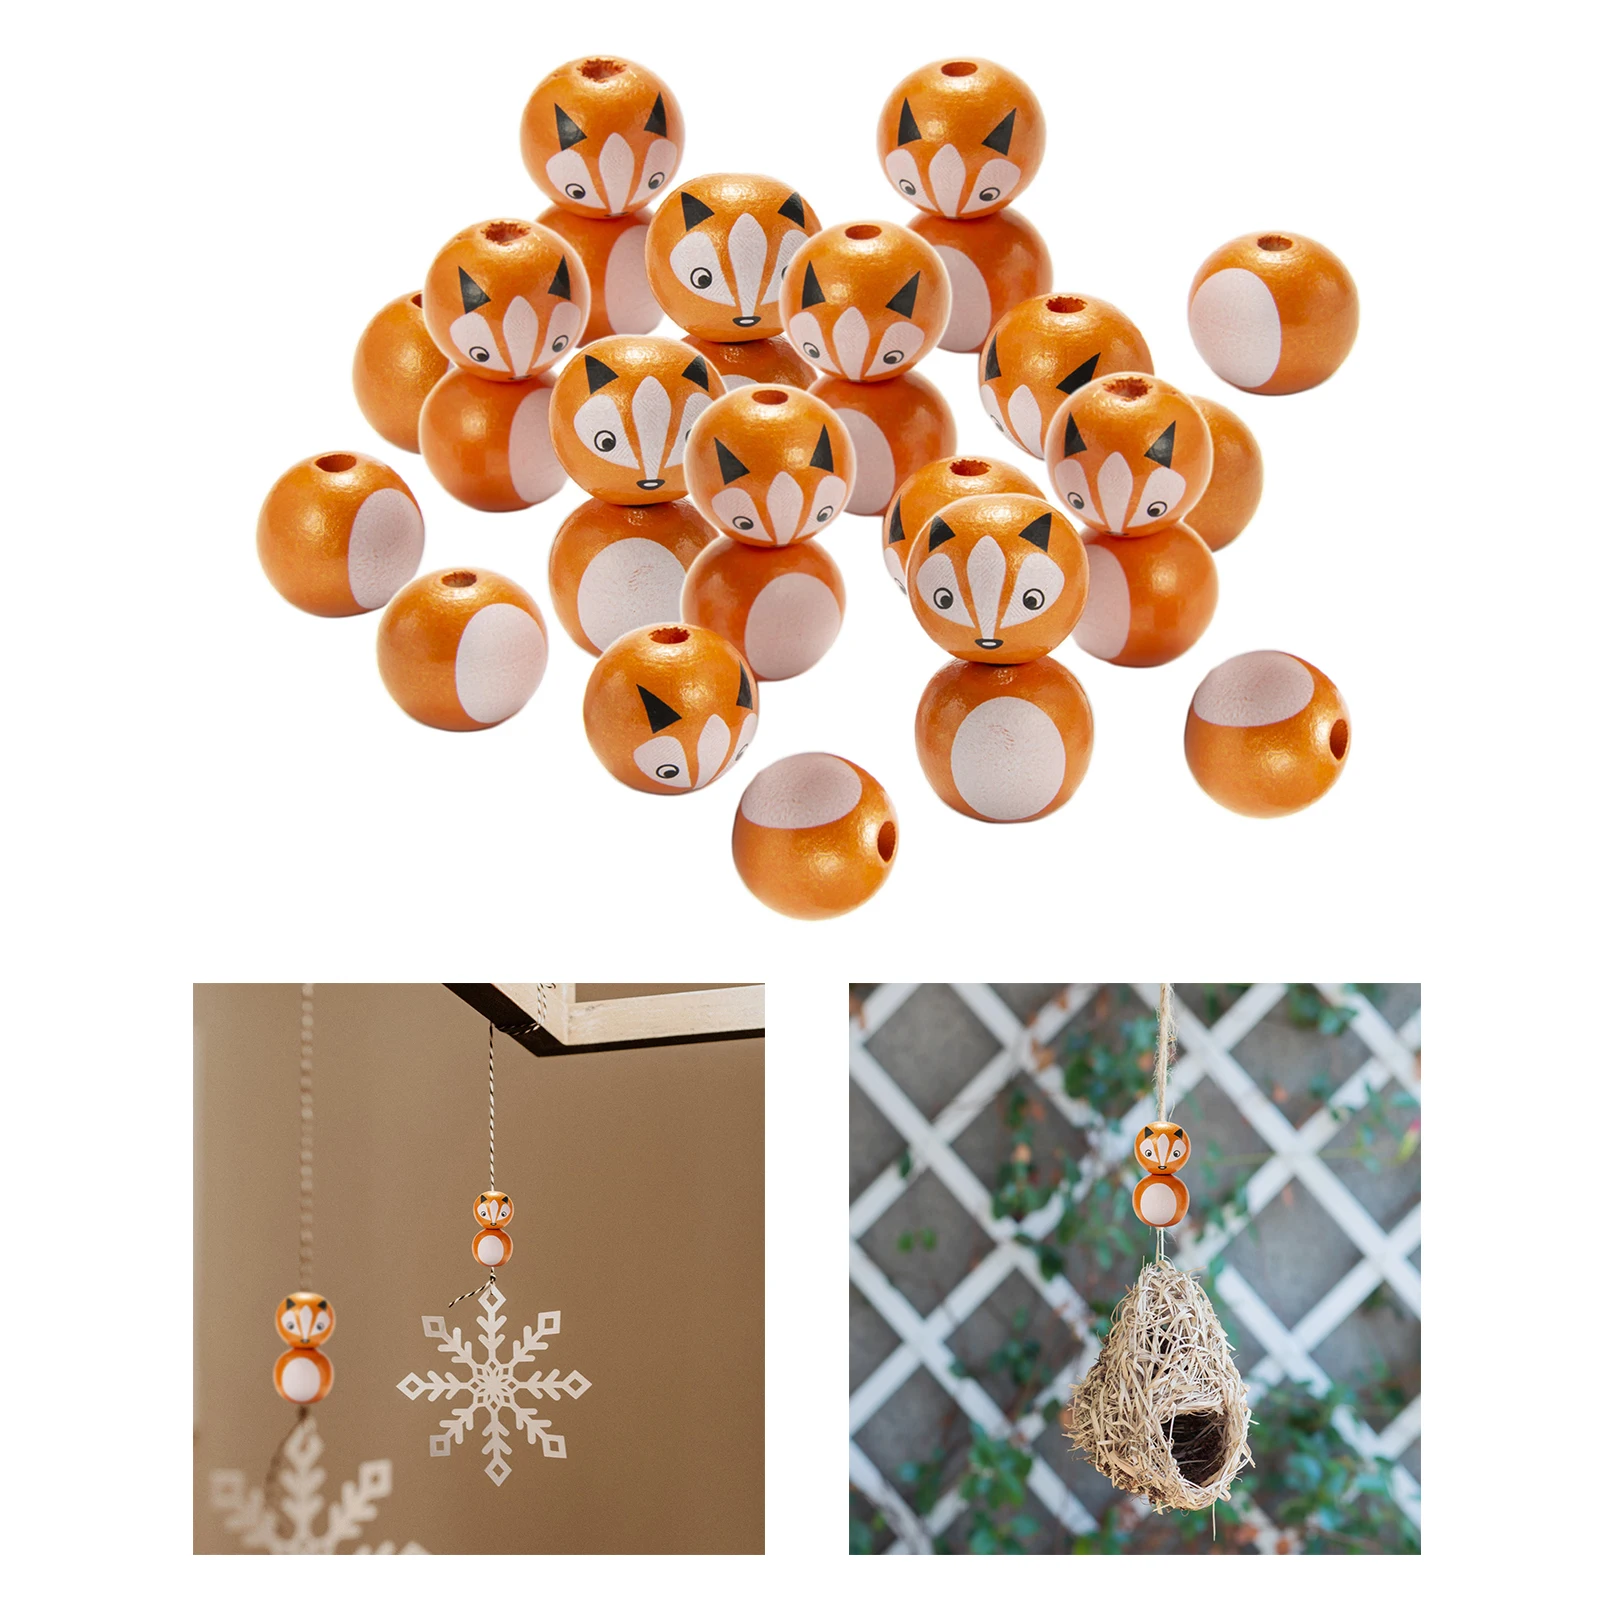 30x Wood Beads 20mm Animal Head Ball Kit Charm Small Supplies with Hole Art DIY for Jewelry Project Findings Charms Craft Making